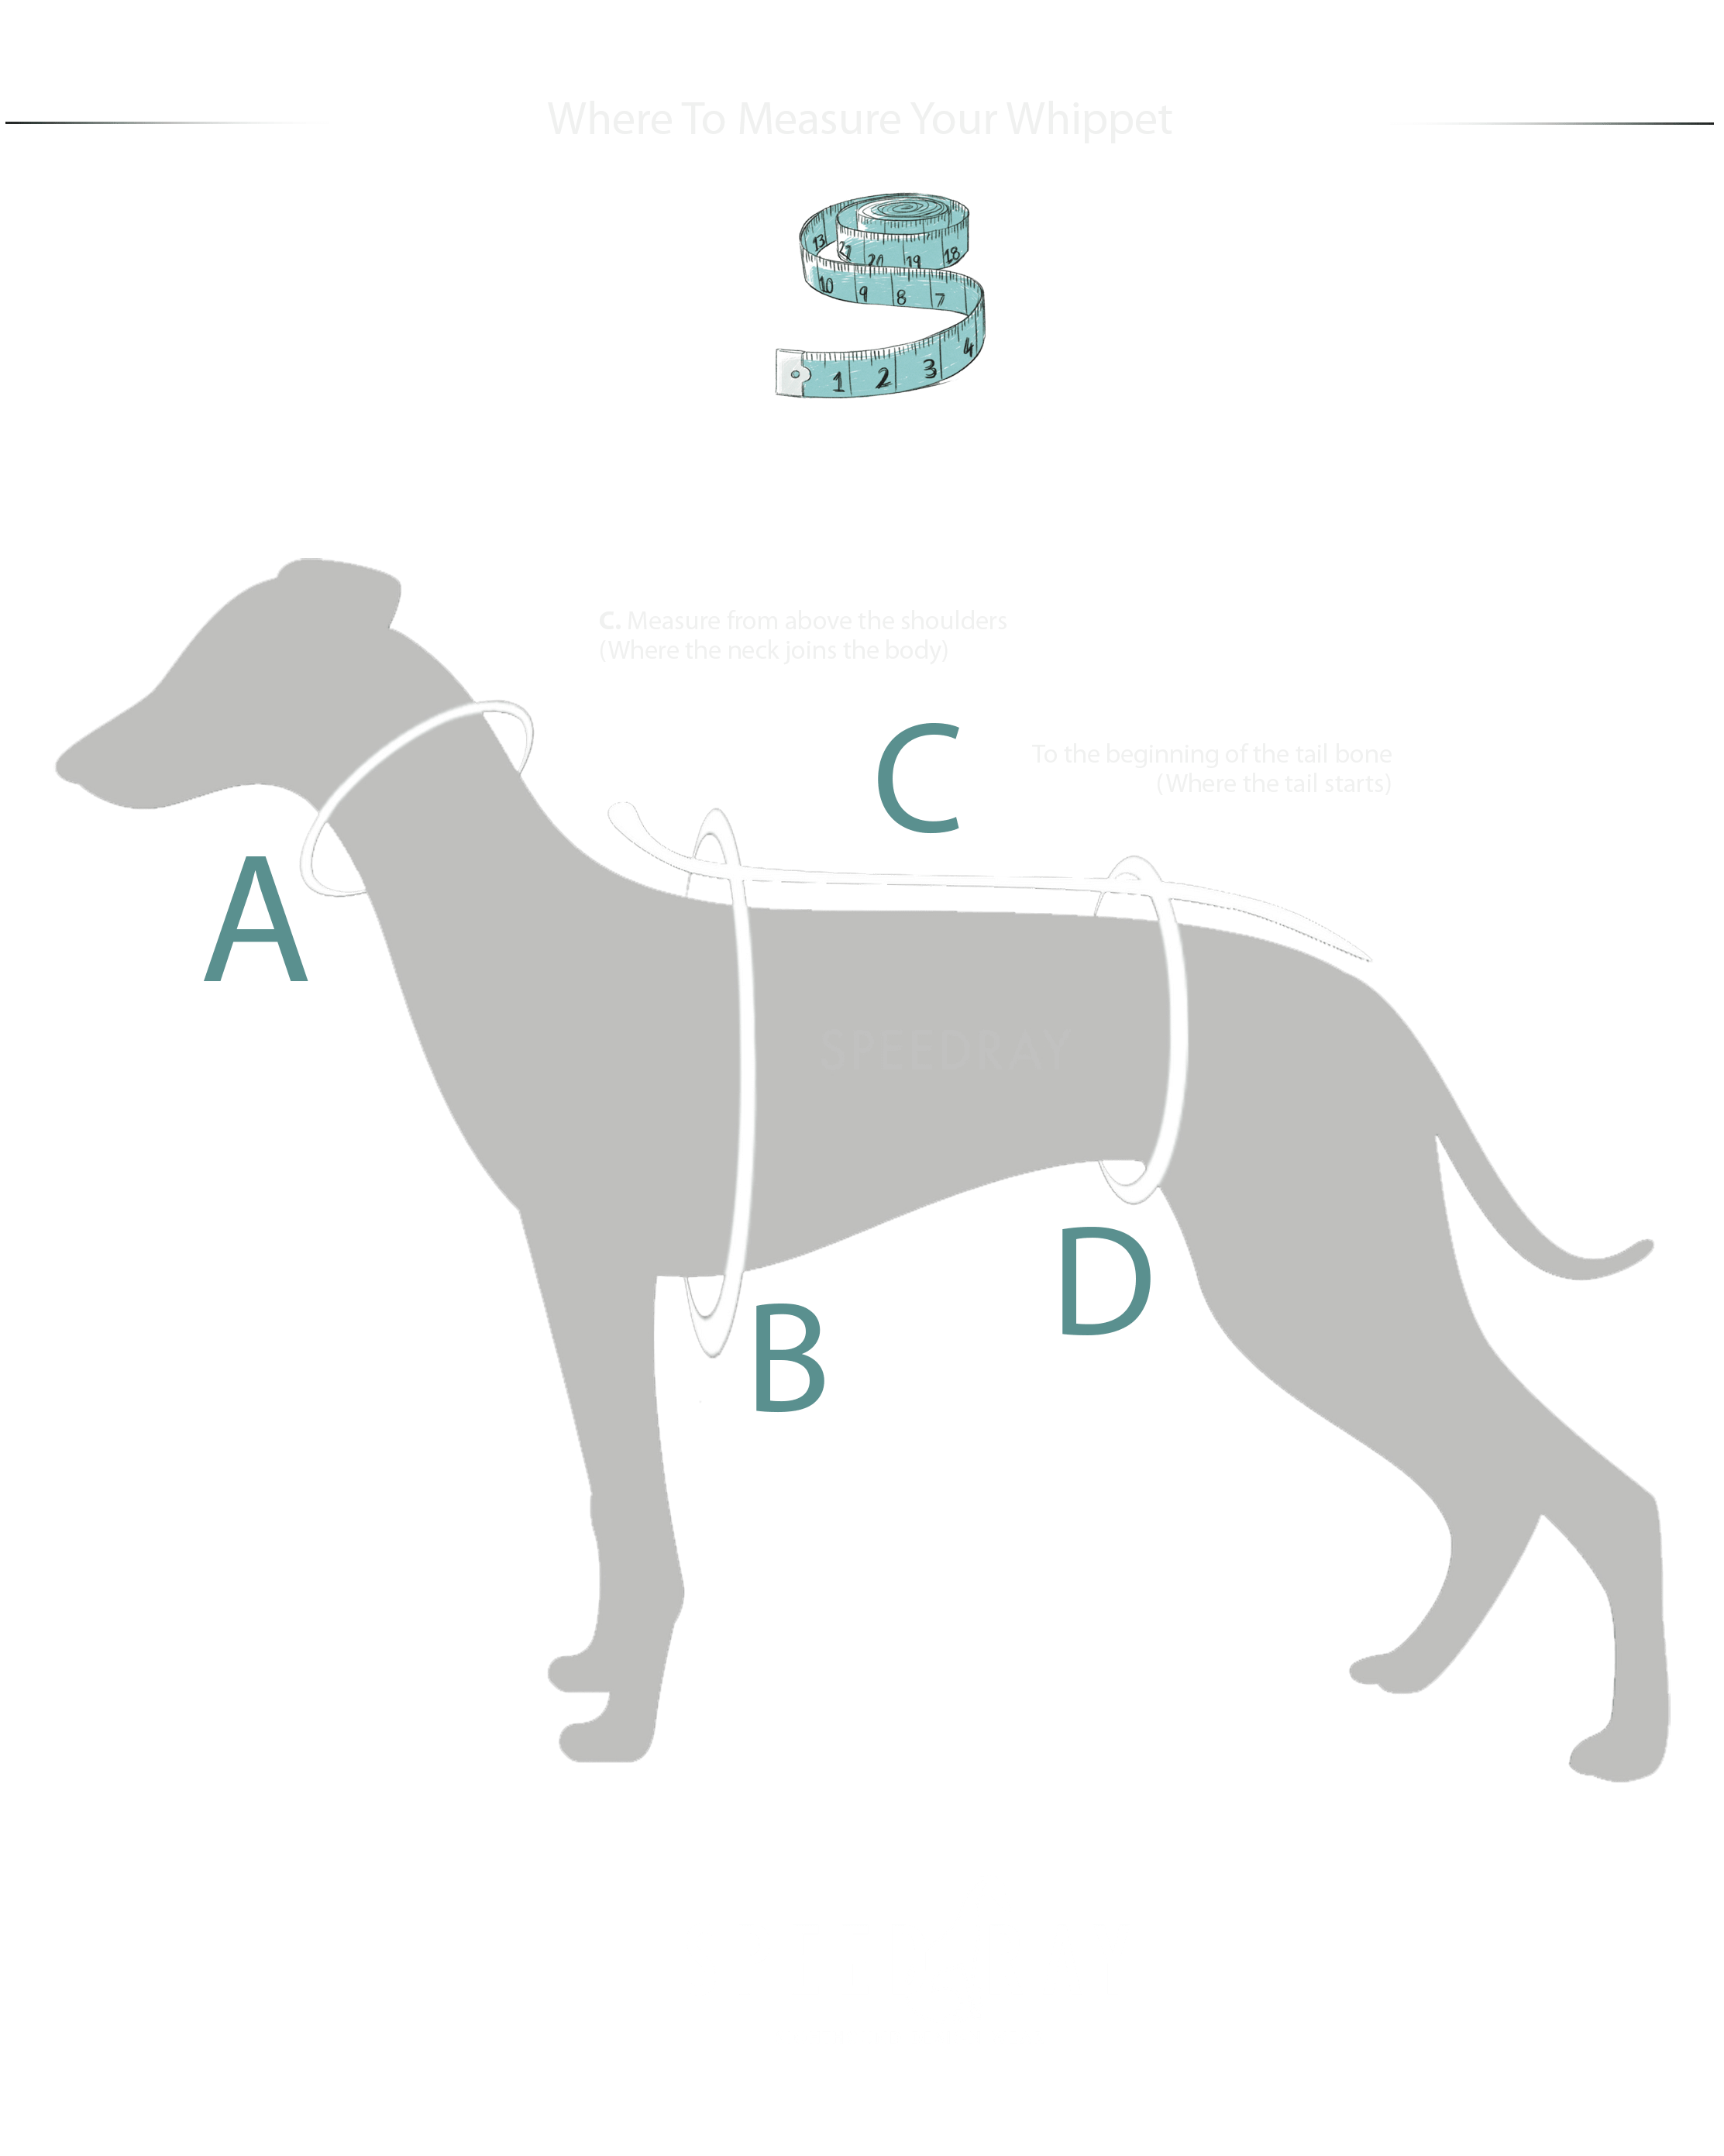 Whippet size chart. How to measure your Whippet. Bespoke to the Whippet dog breed made to measure